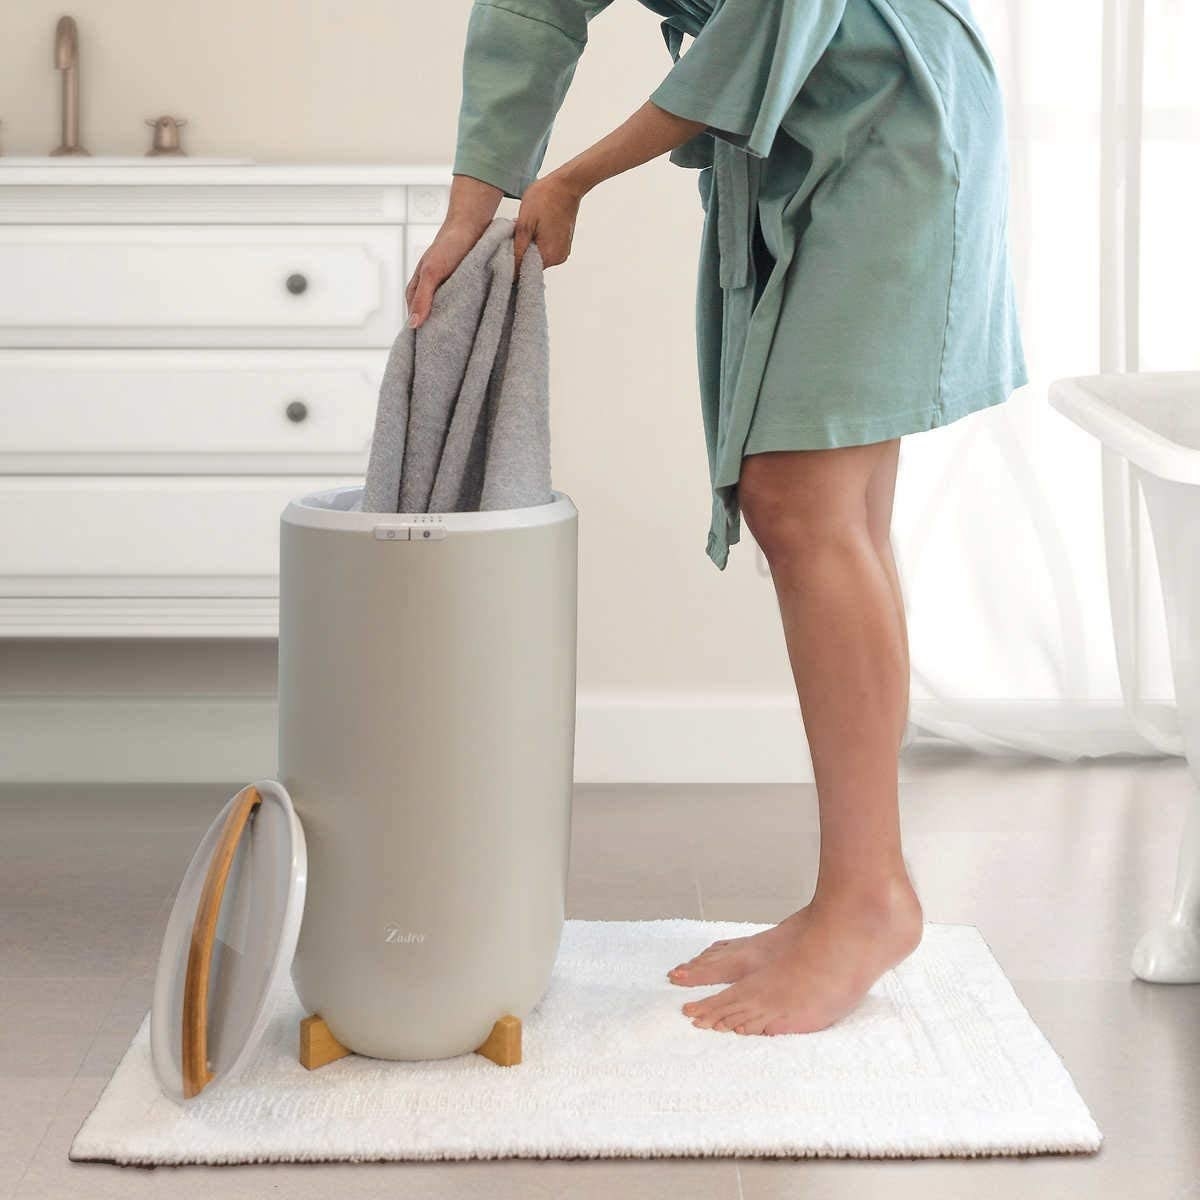 The circular-shaped bin in grey with a lid and wood handle